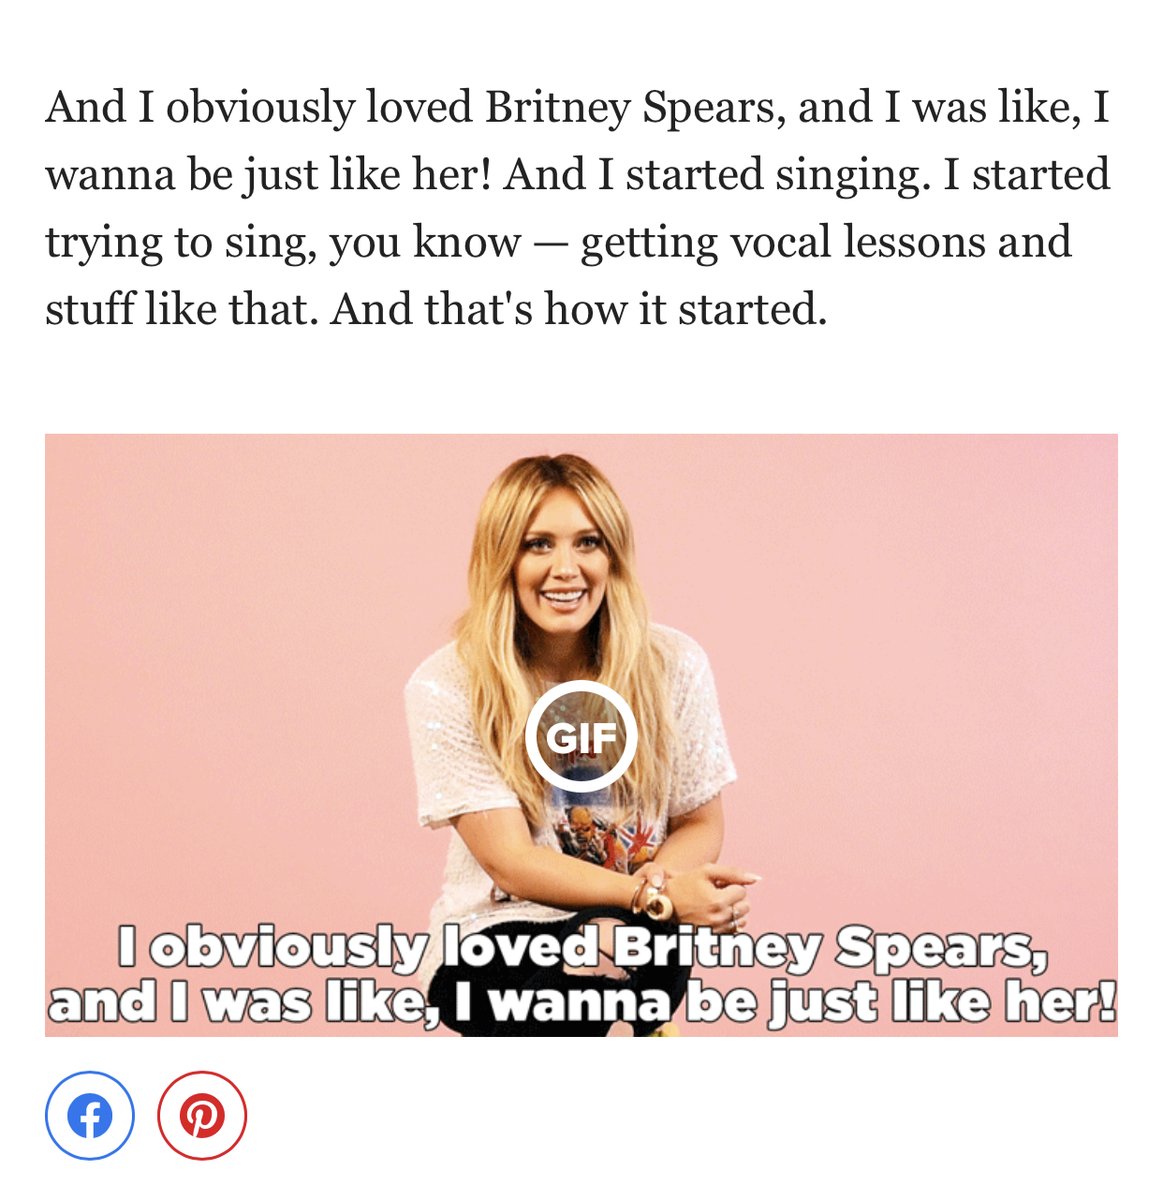 Hilary Duff has said Britney inspired her to become a singer.